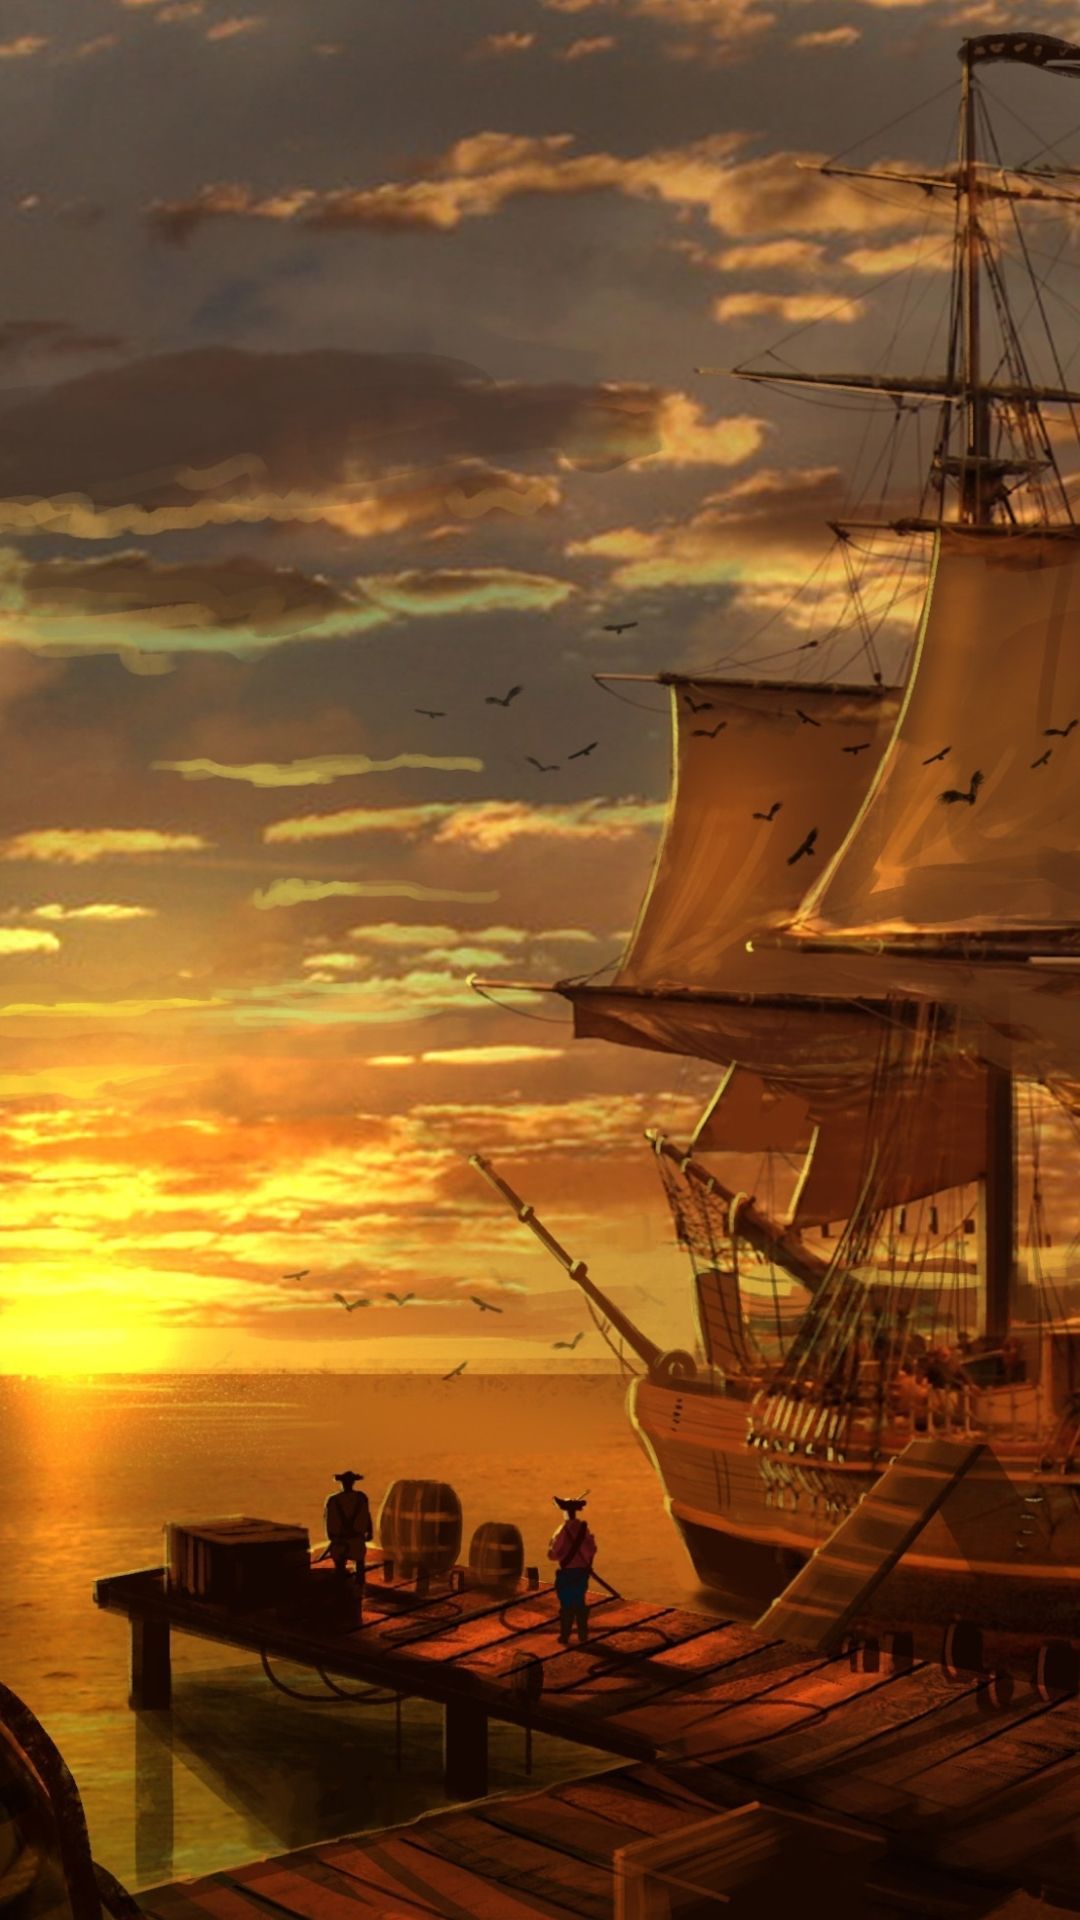 A painting of an old ship at sunset - Pirate